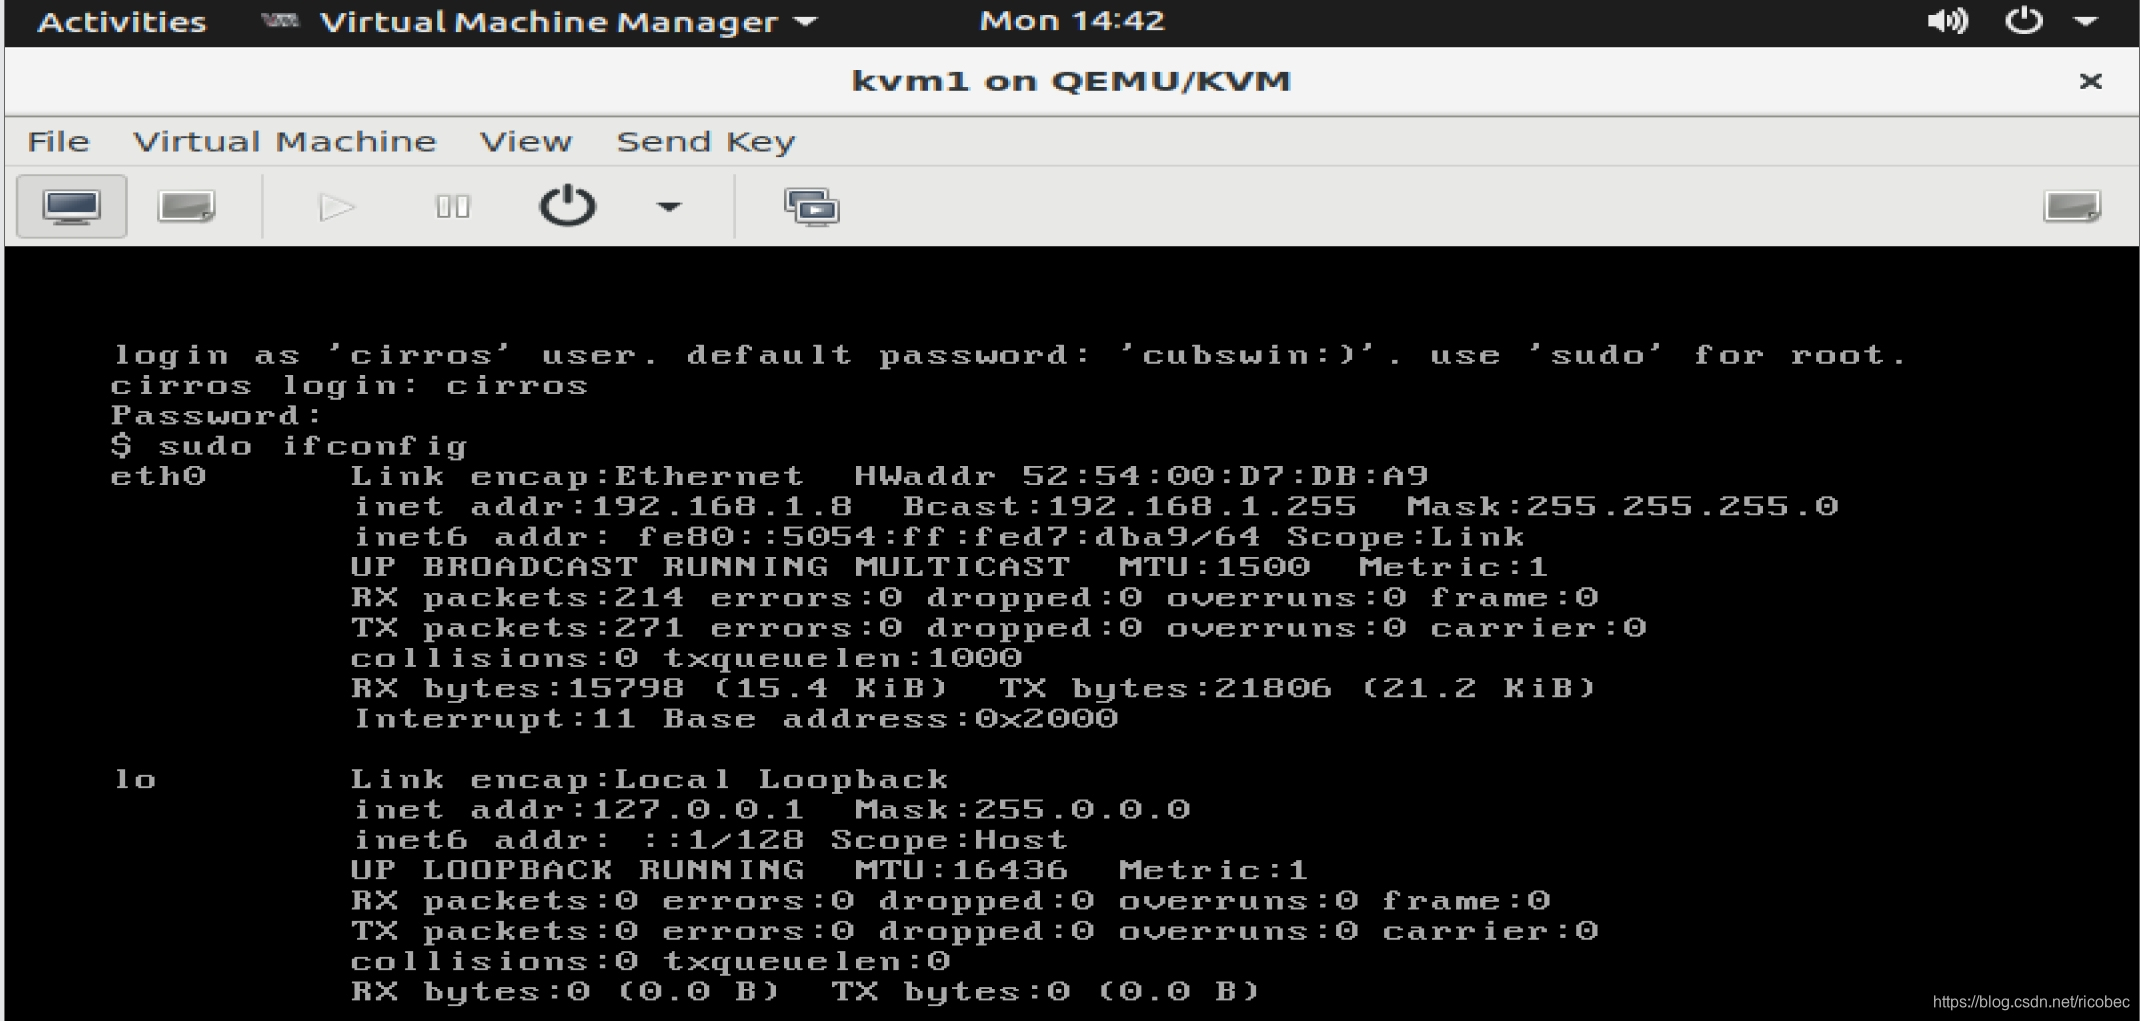 virt-manager-vm-console